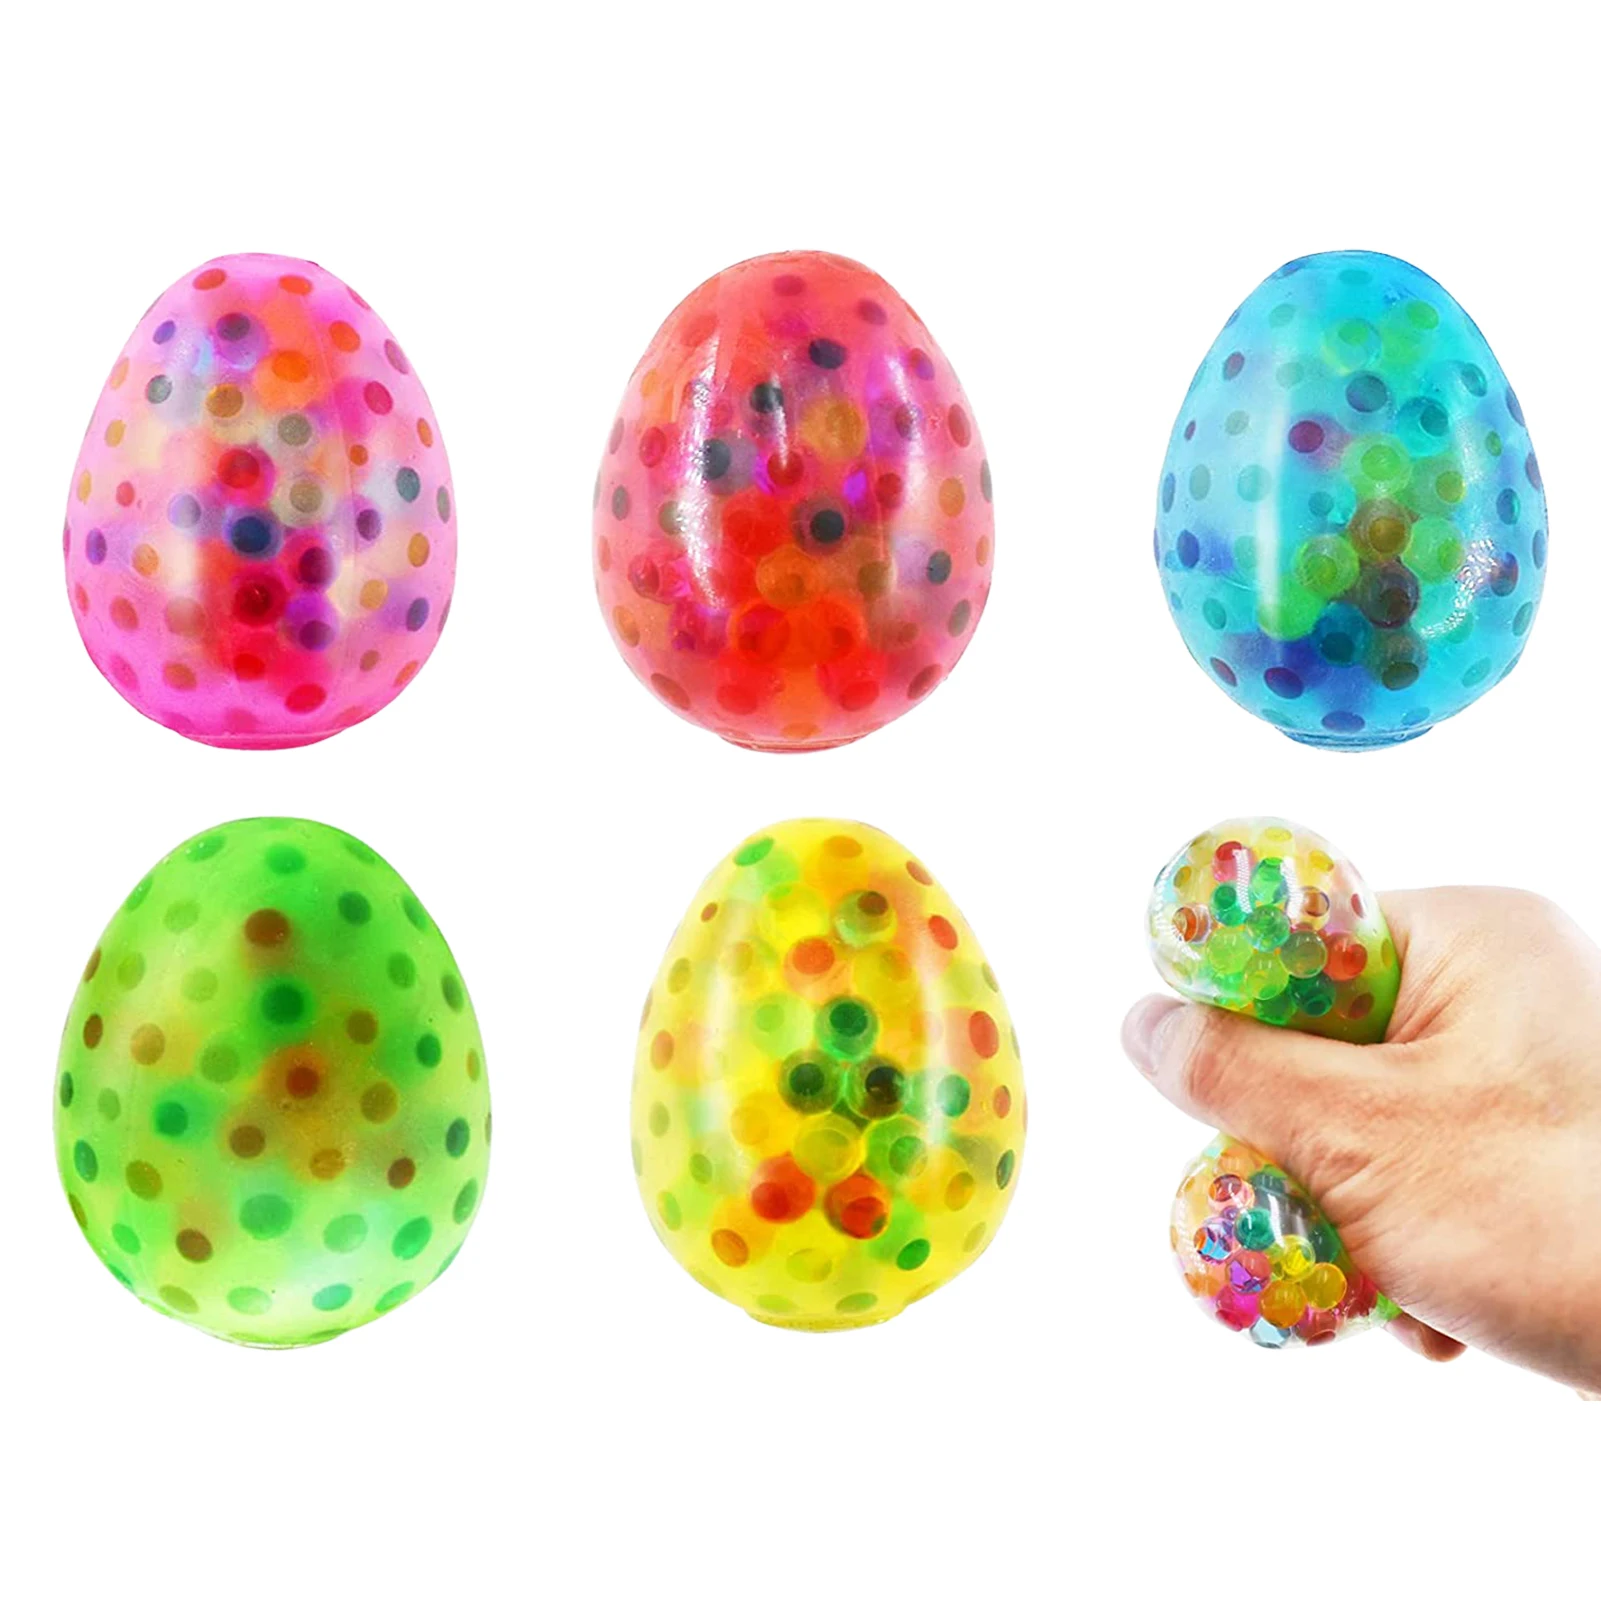 

Squish Ball Cute Small Squeeze Stressball Toy For Kids Adults Anti Stress Sensory Rainbow Novelty Funny Water Bead Squishy